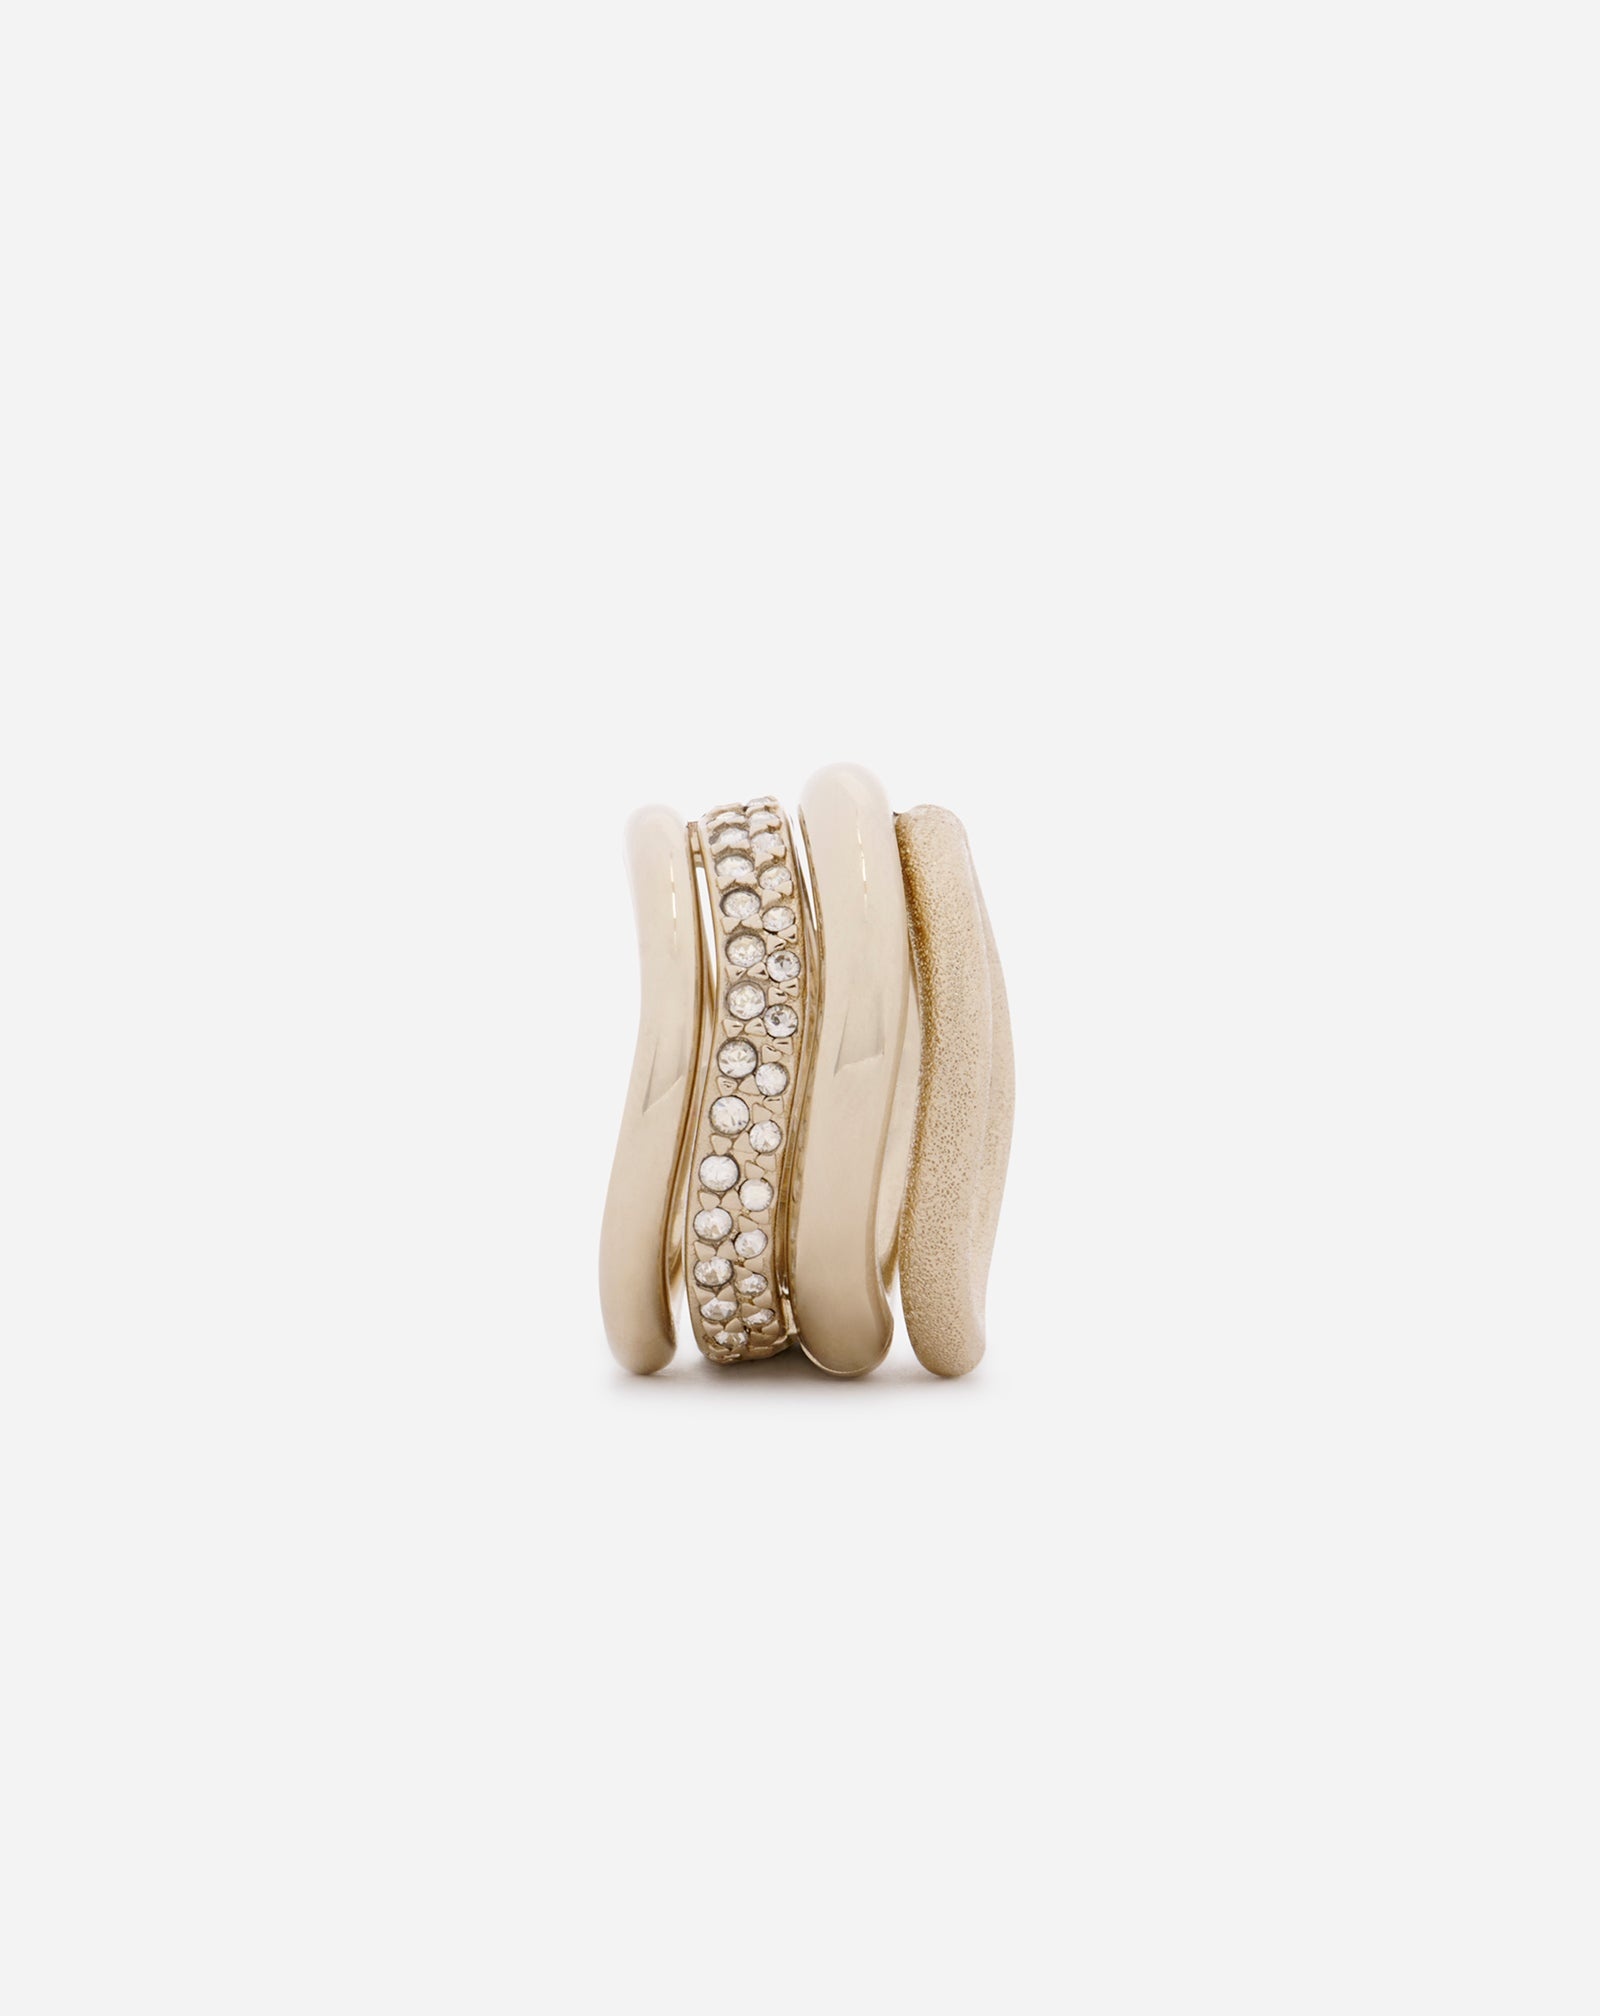 PARTITION BY LANVIN RING - 1